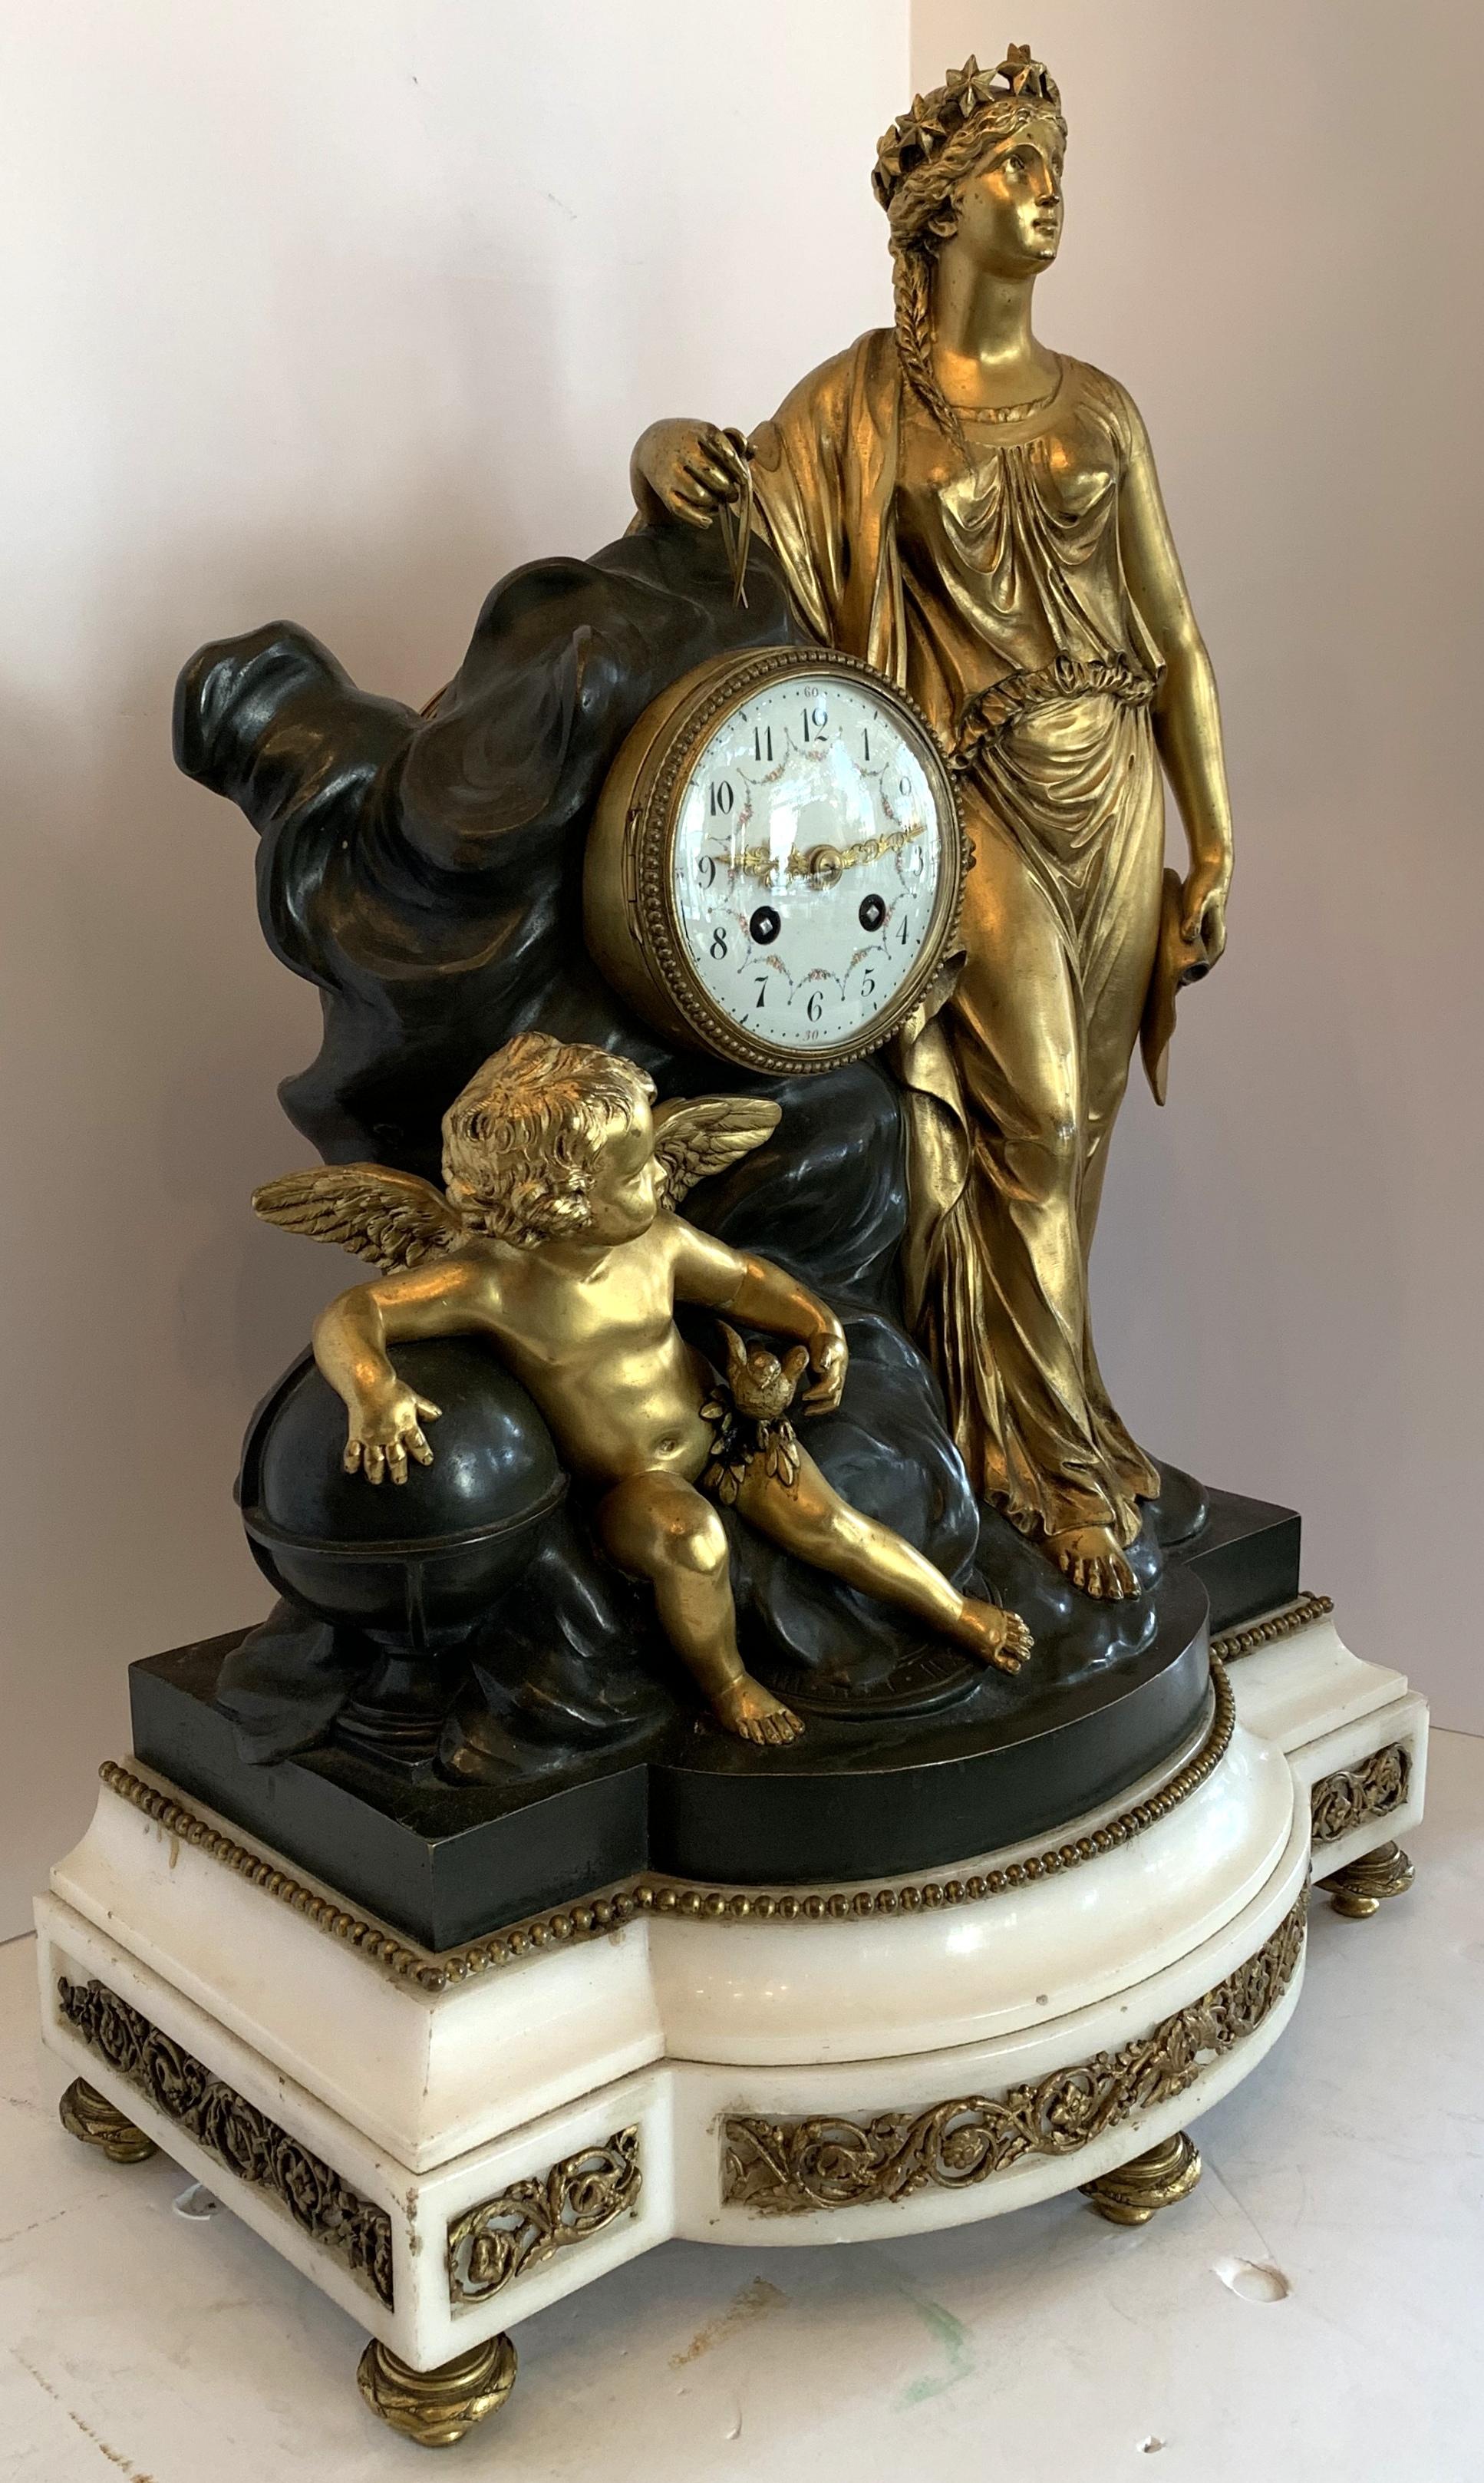 A Regency monumental doré and patinated bronze ormolu-mounted on marble base clock adorned with figures of a Cherub and a Maiden, extremely large and heavy. Back cover is missing, not currently working.
Provenance: Purchased From Christie's New